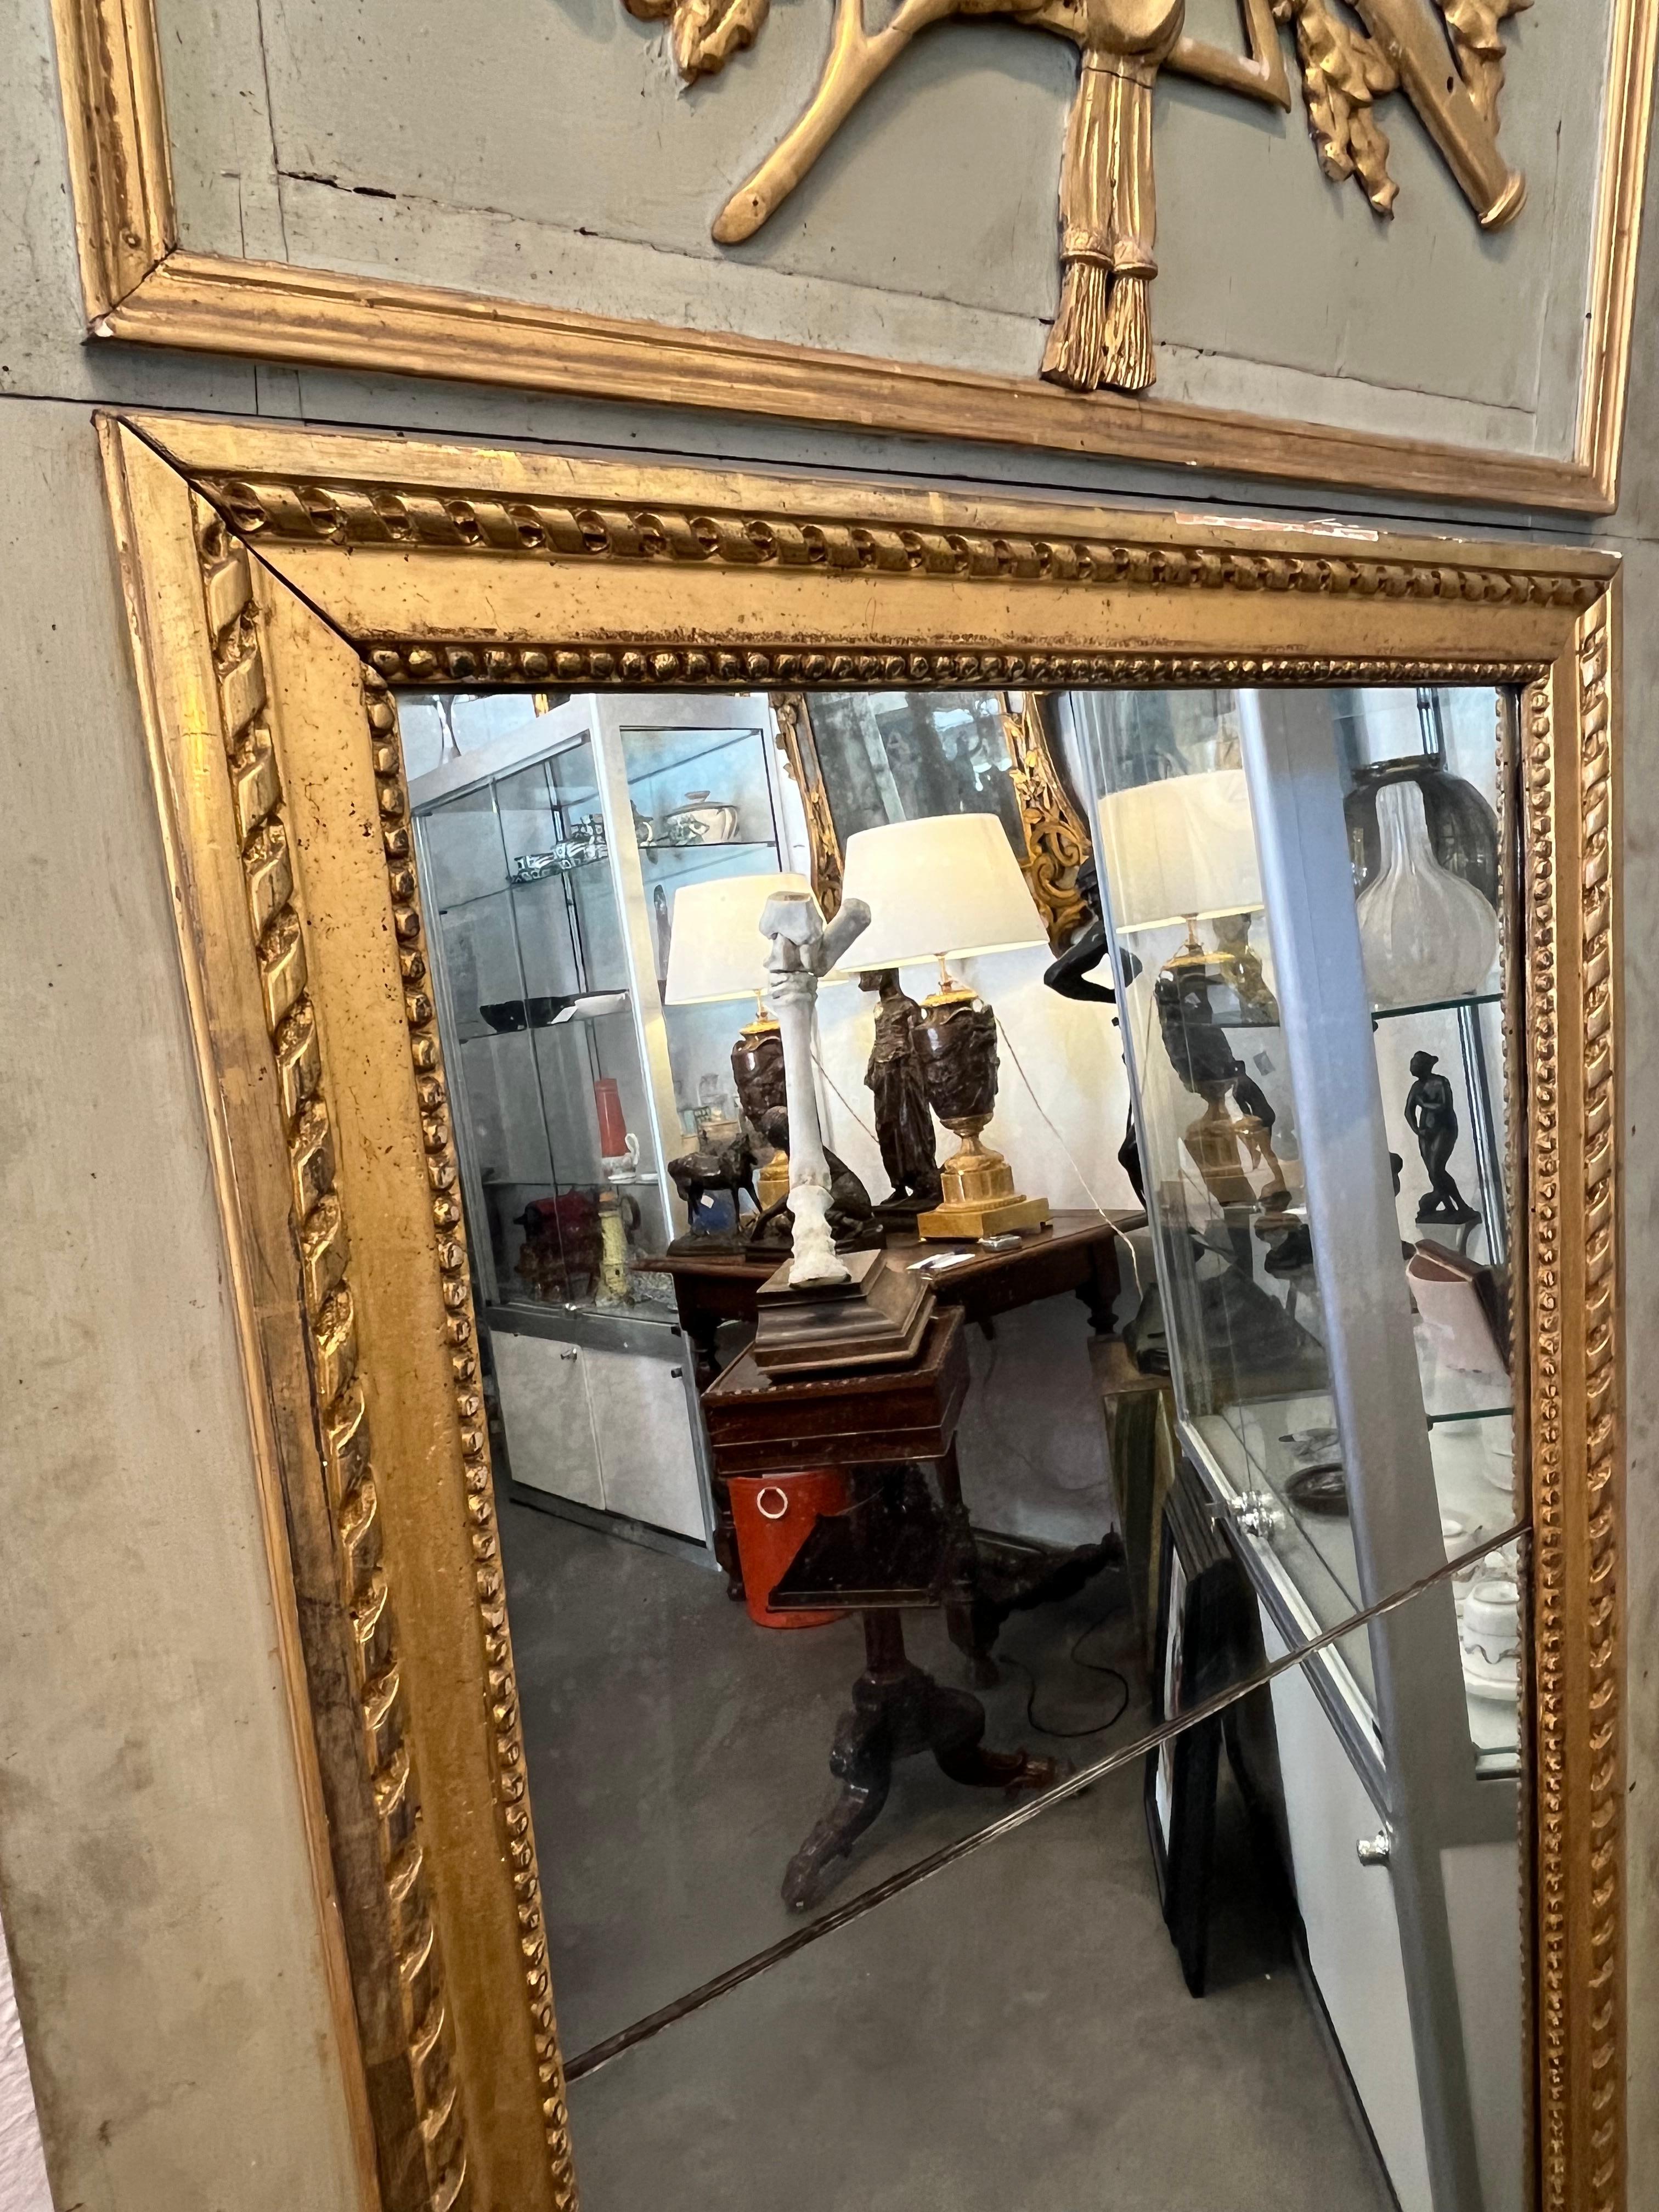 Very beautiful old overmantel mirror from the Louis XVI period (see our article on the Louis XVI style) made during the 18th century in carved, painted and gilded wood. The upper part is carved with musical instruments and laurel branches. The